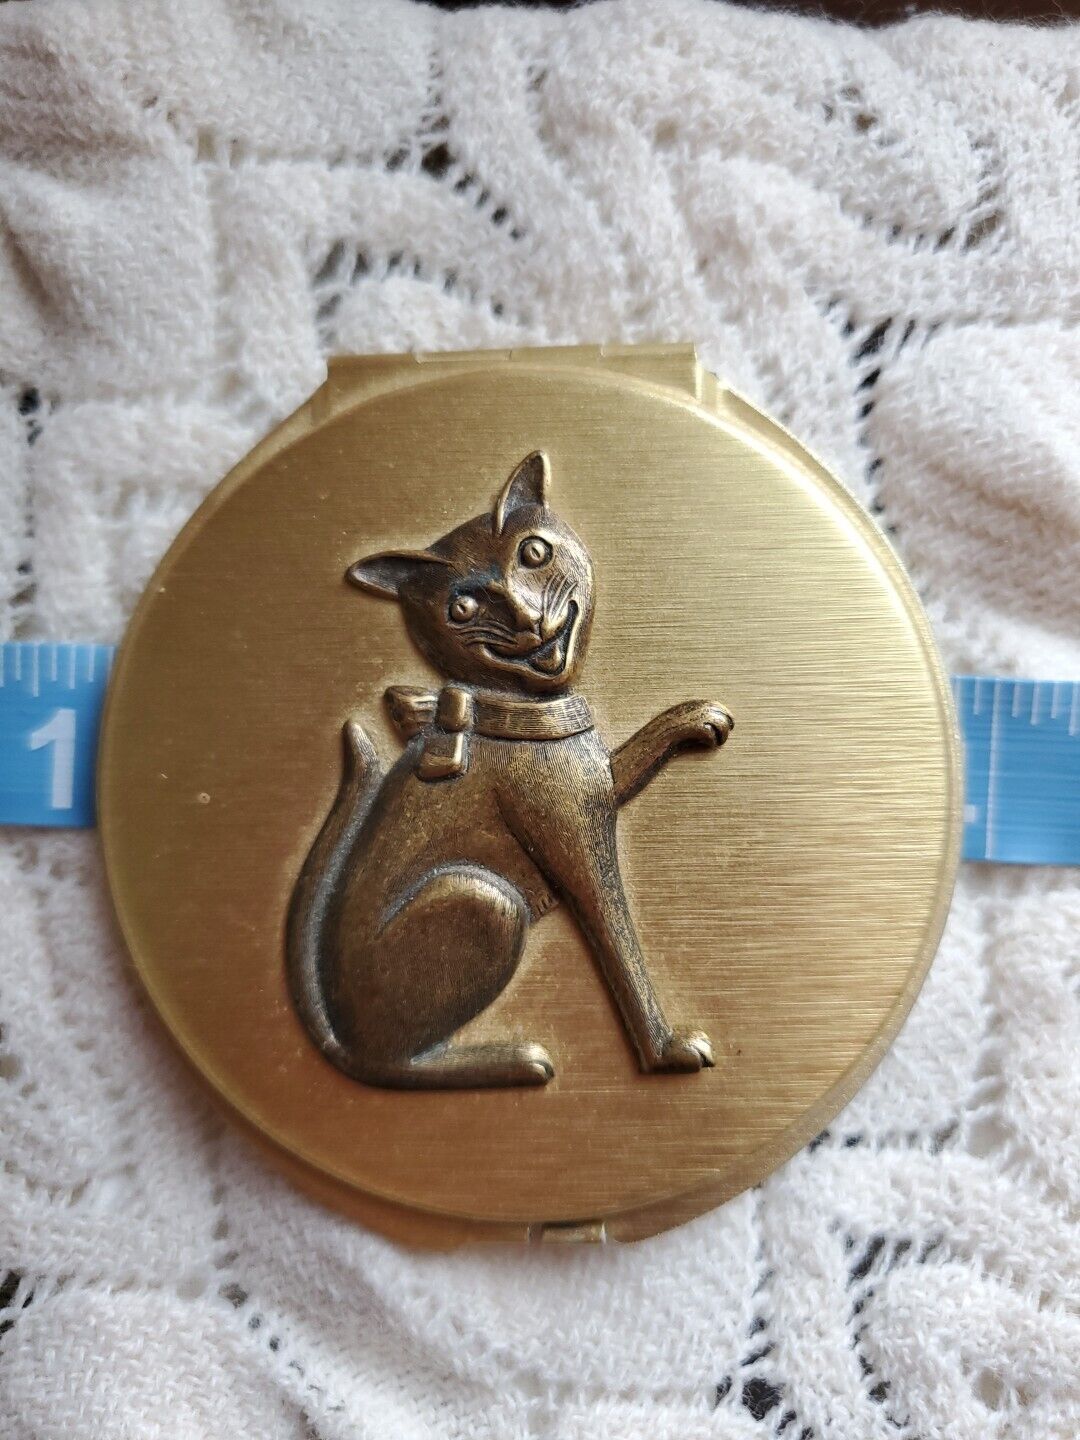 Vintage Brushed Gold Mirror Compact With Repose Smiling Cat Mid Century Modern?